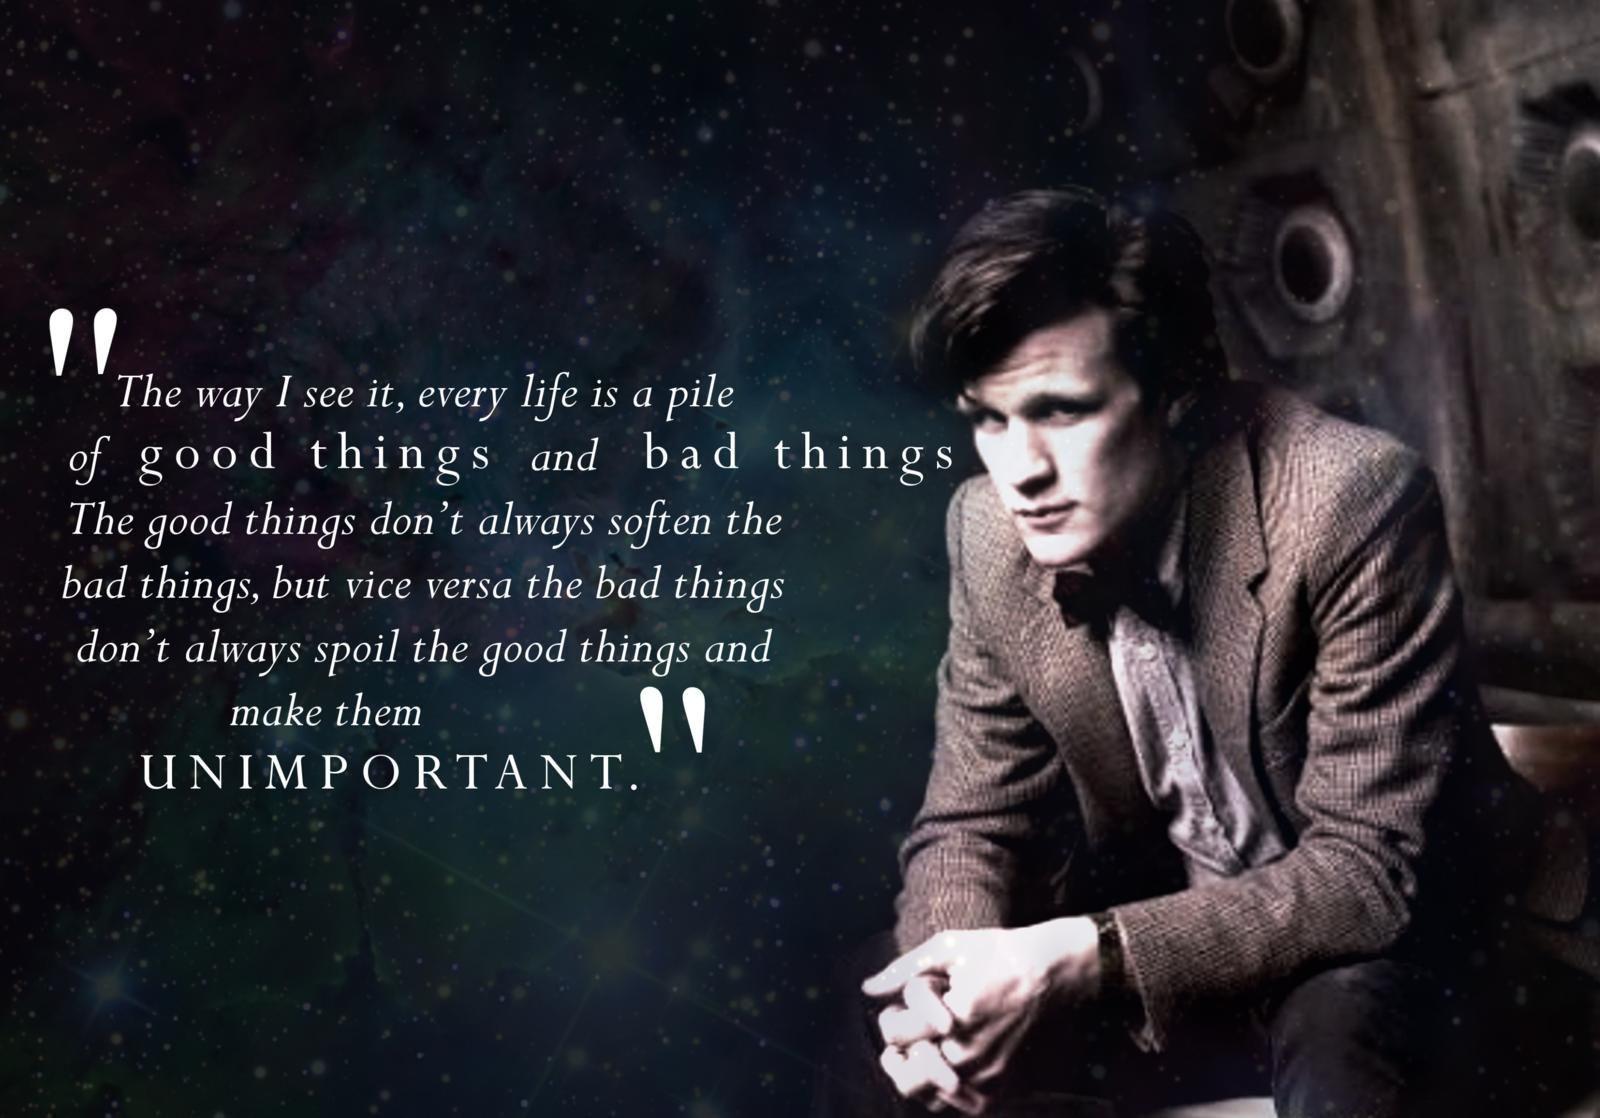 Doctor Who 11th Doctor Wallpapers - Wallpaper Cave